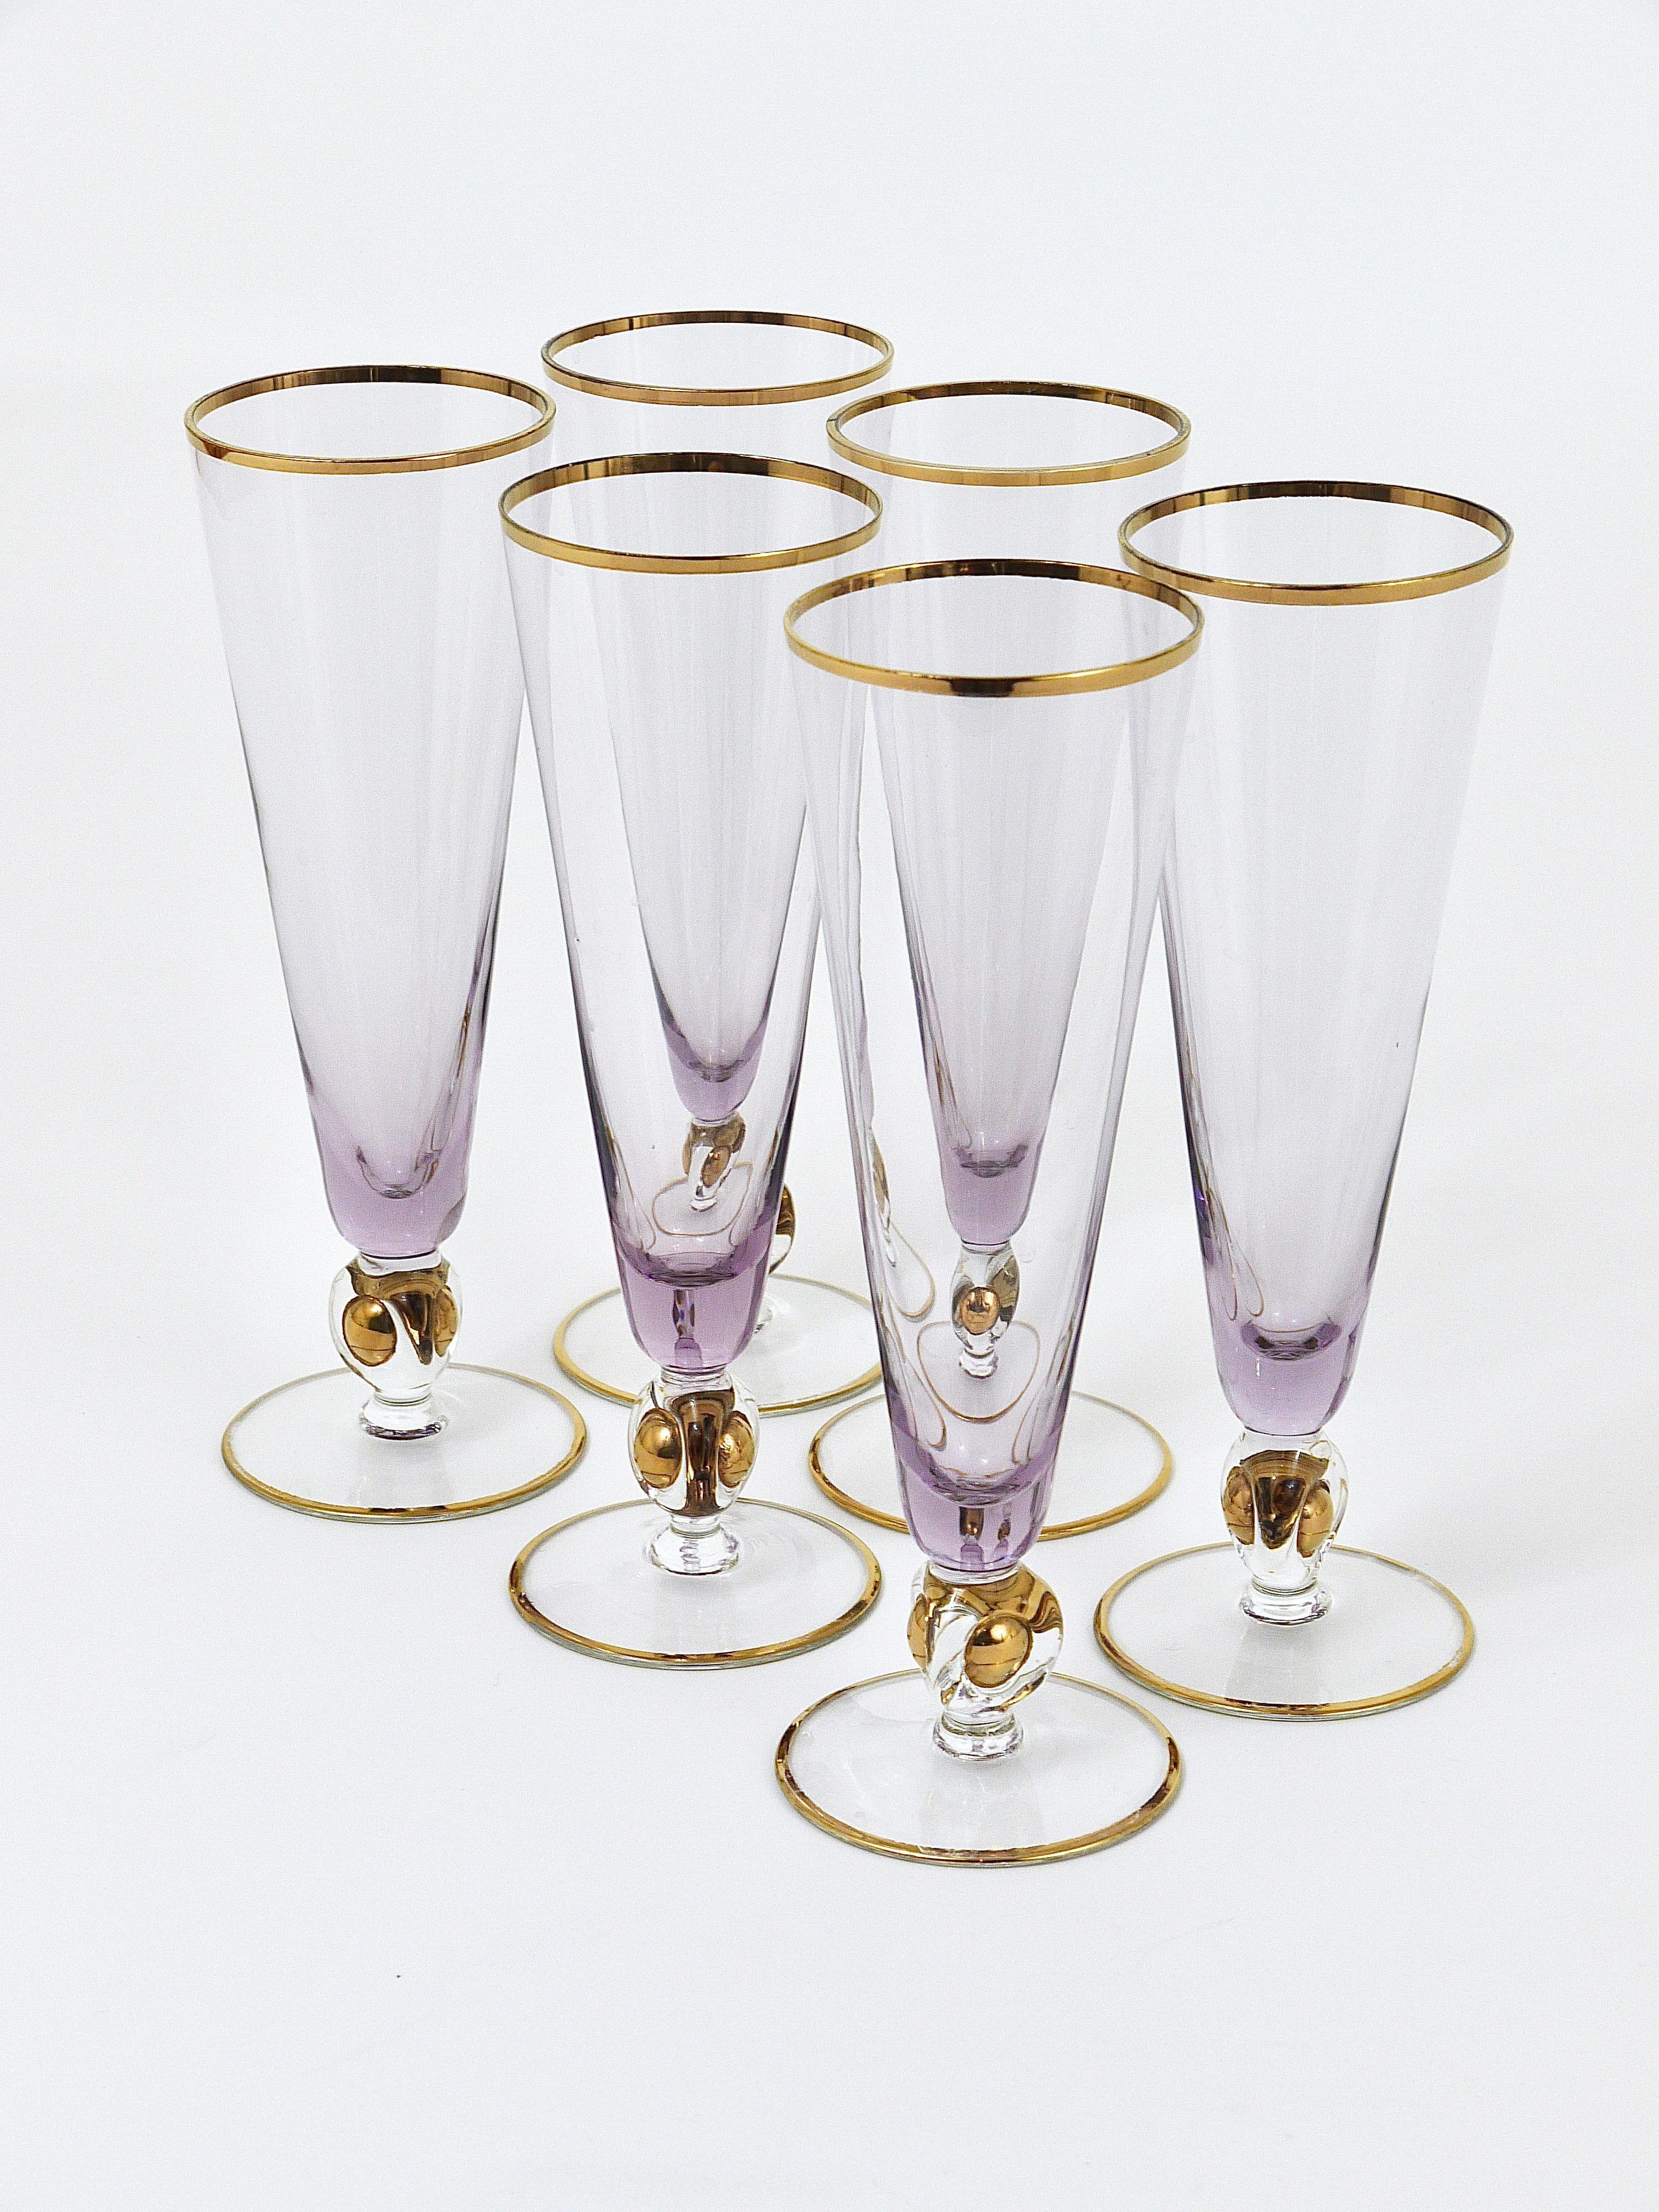 A set of six beautiful hand blown glasses for champagne or sparkling wine, made of clear and purple glass with gold rims and a golden ball in the stem. Made by Lyngby Glassworks in Denmark in the 1960s. In very good condition, with marginal partial